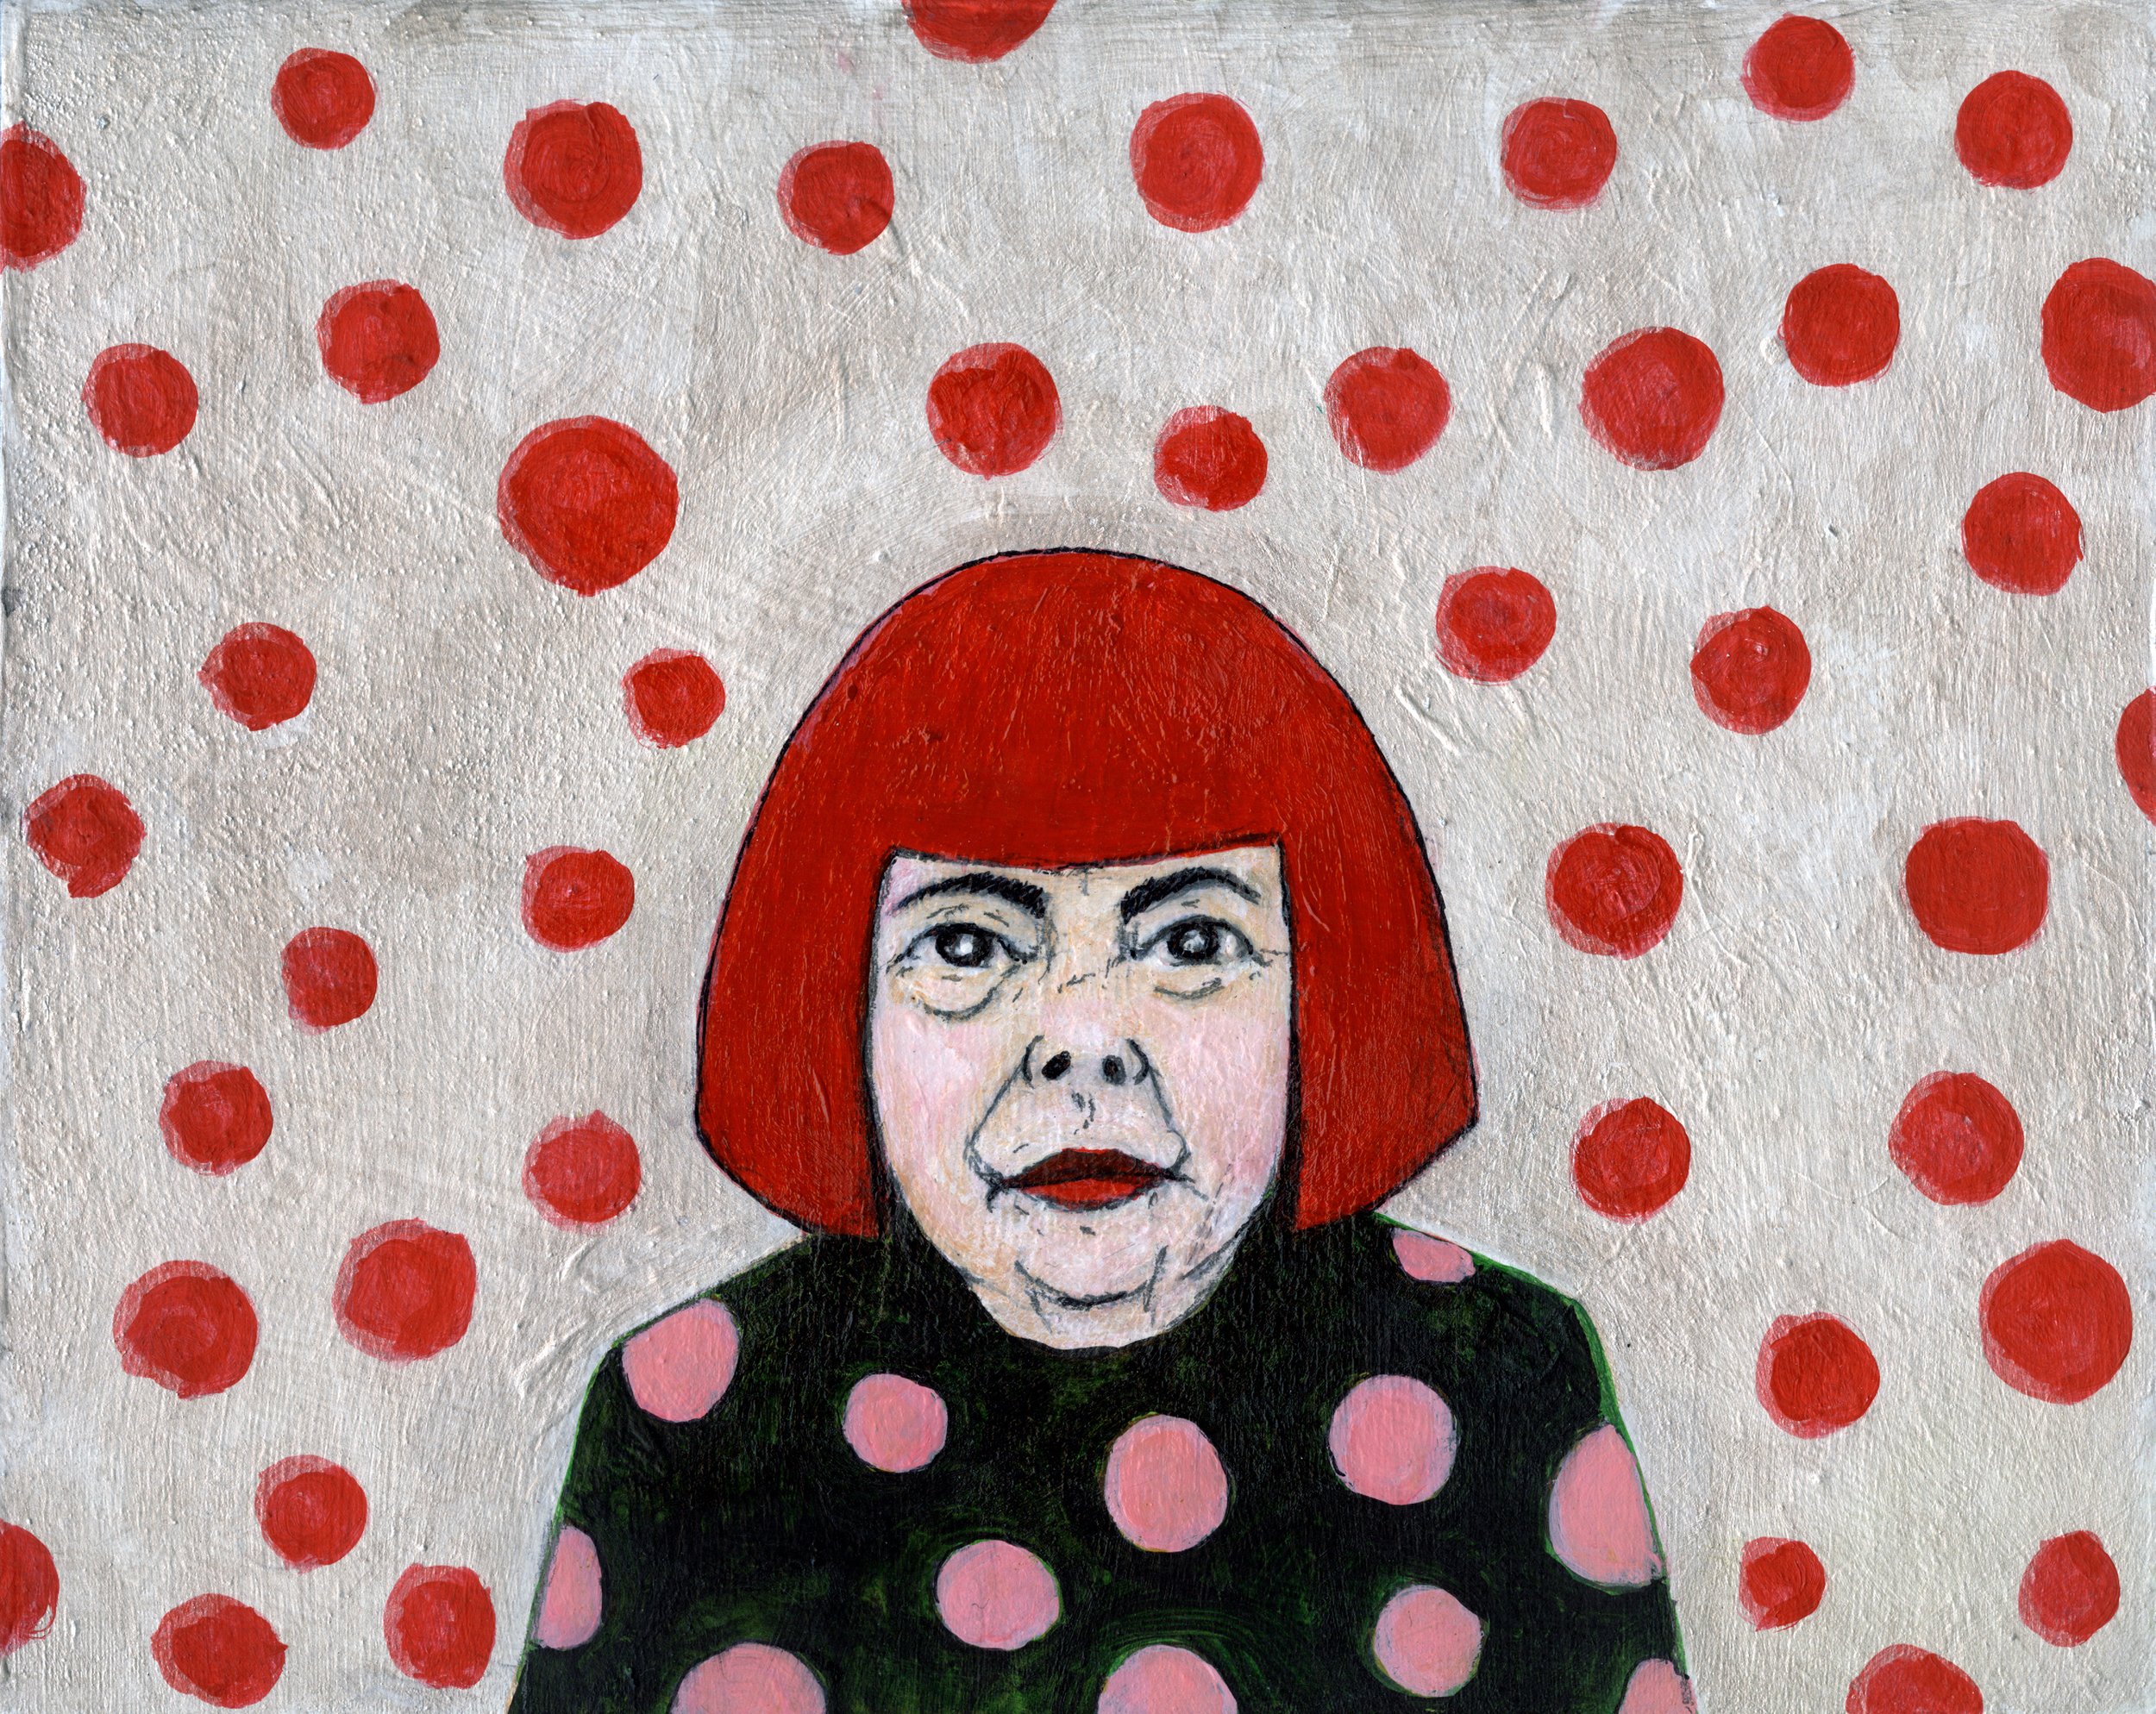 Right Before the Covid-19 Lockdown, I Read that Yayoi Kusama was the World's Most Popular Artist by Hugo Kobayashi